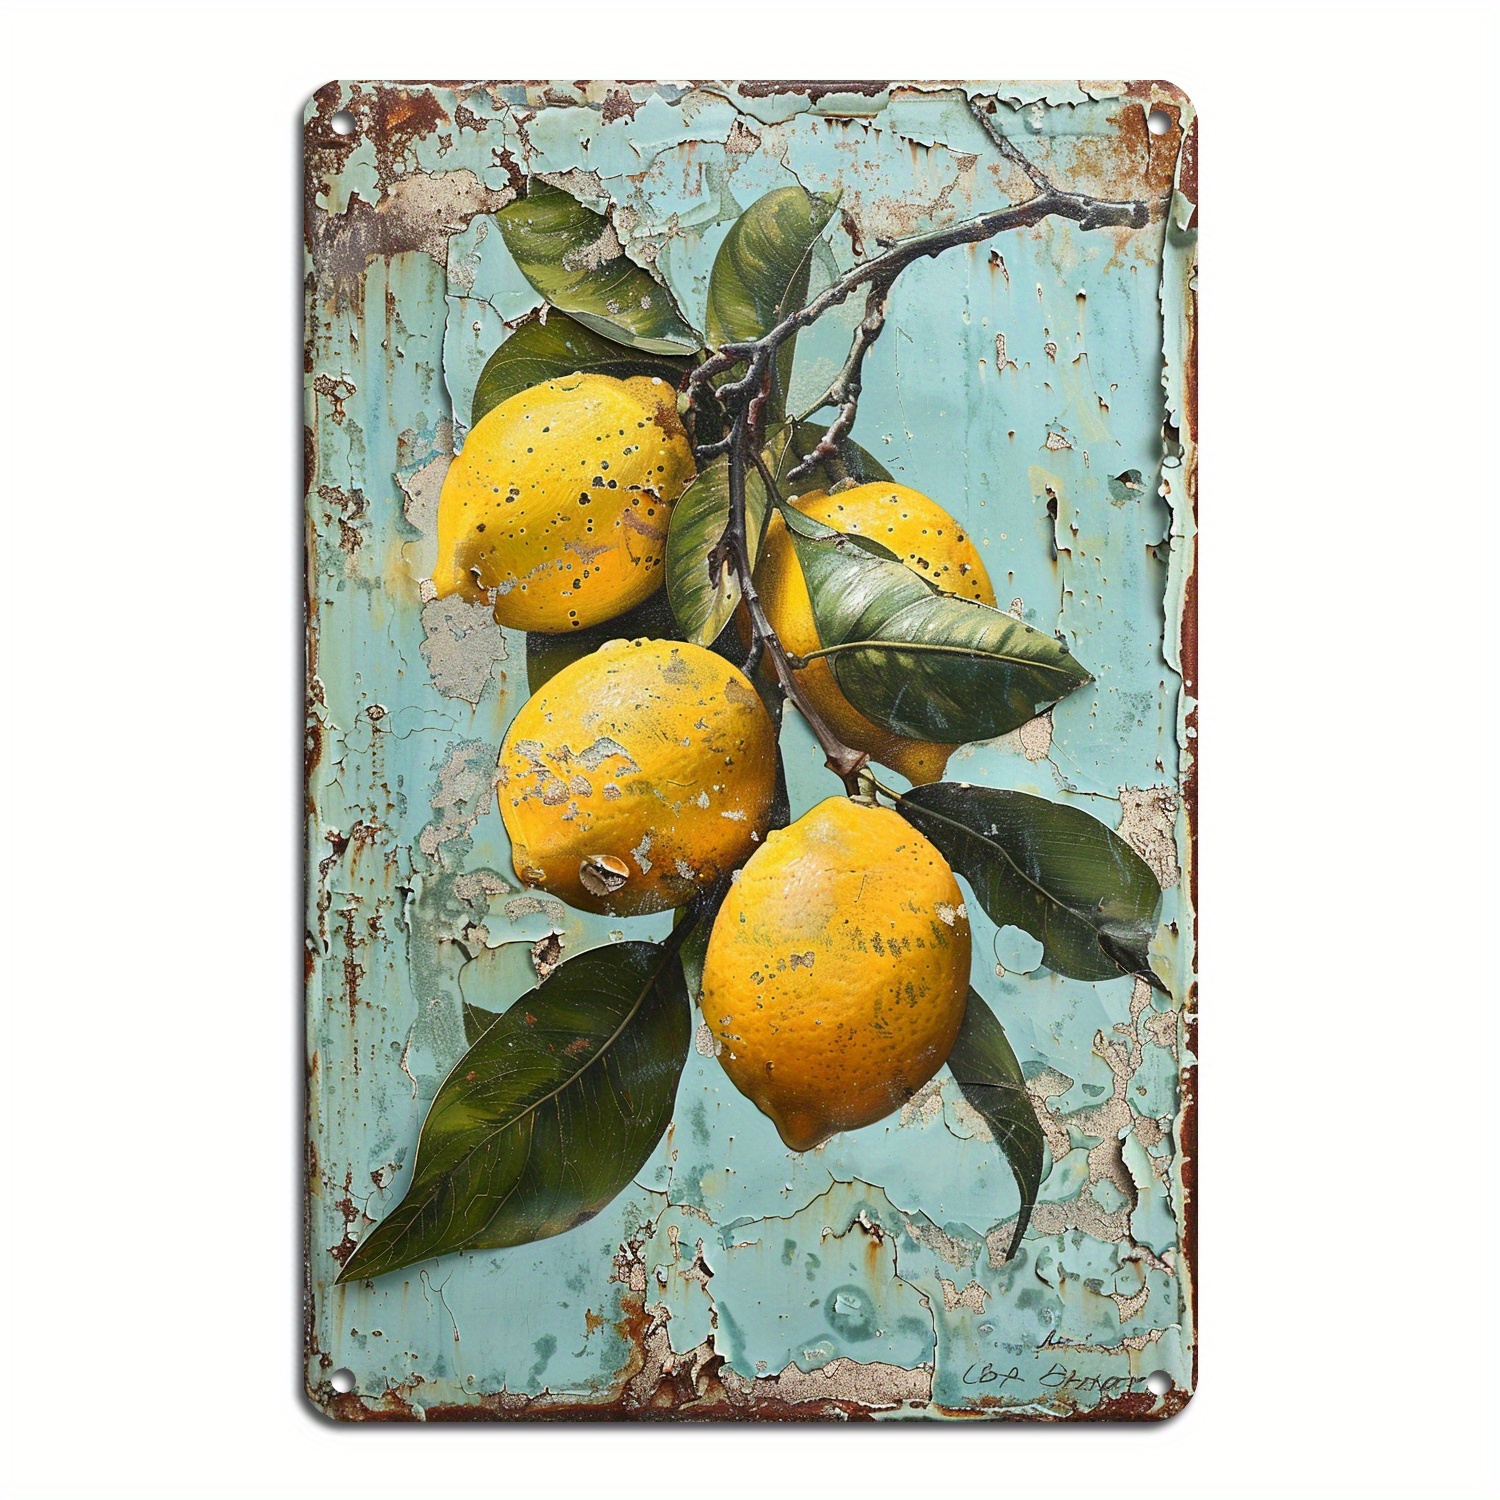 

Metal Sign 8x12 Inch, Yellow Lemon Leaf Vintage Tin Sign Wall Art Decor For Home, Living Room, Kitchen, Garden, Bedroom, Office, Hotel, Cafe And Pub Decoration